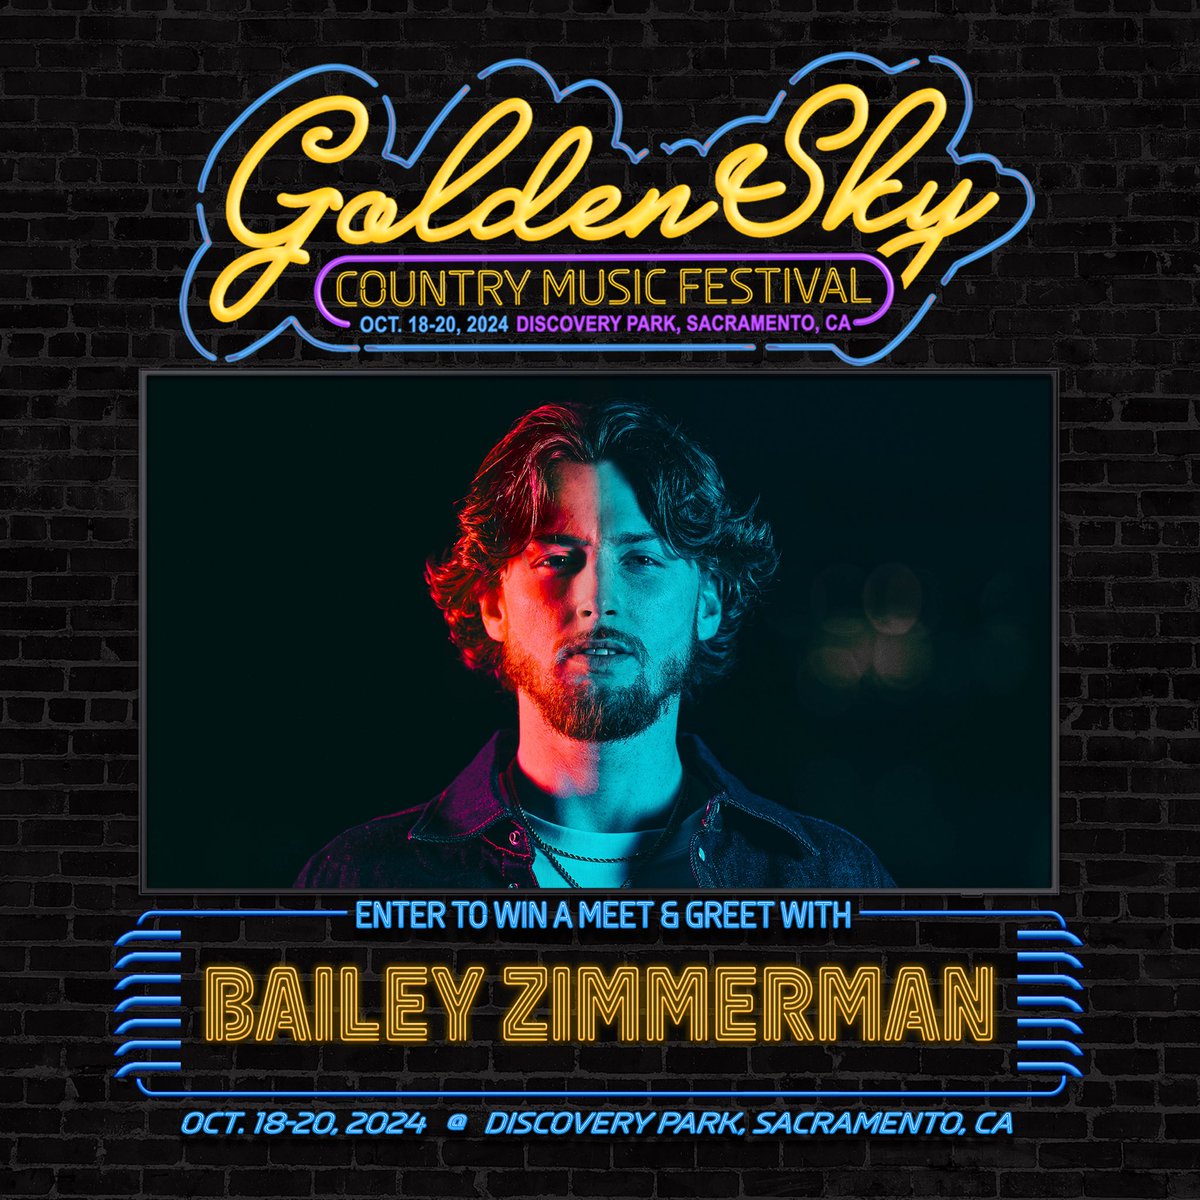 GoldenSky, we're giving you the golden opportunity to meet @baileyzimmerman backstage at the best country music festival in Northern California! Head to bit.ly/GS24contest and enter for a chance to create memories that'll make this year the best GoldenSky yet. 🌟